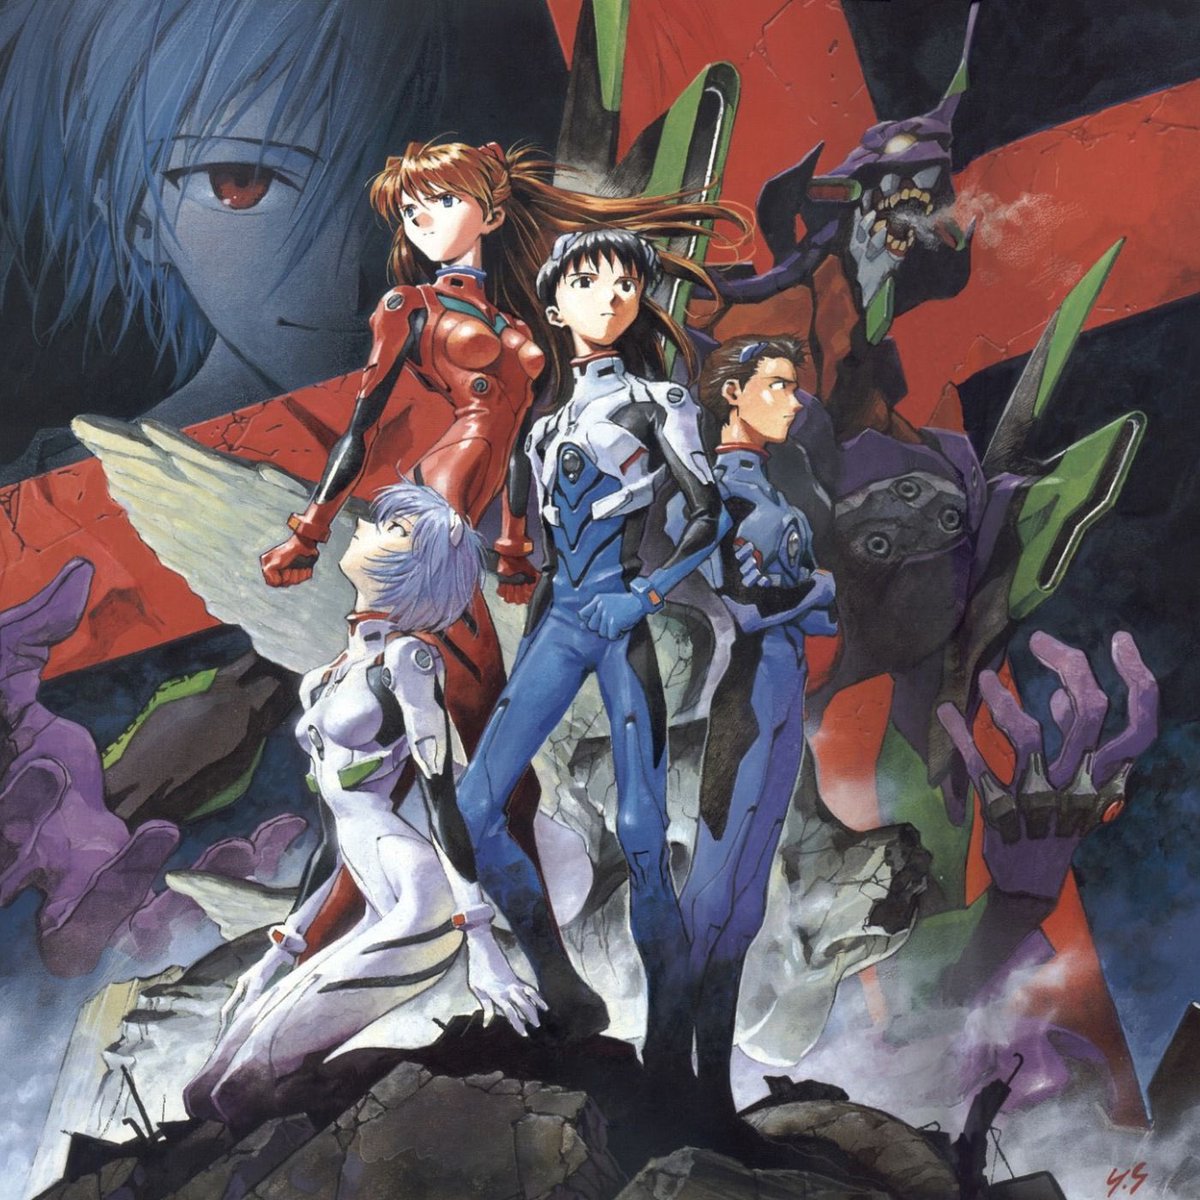 Overall what I would say is that Evangelion is a touching and arguably life changing story that clearly has something for everyone. How much you take out of it is completely up to you and I personally took a great deal out of it, be it positive or negative.